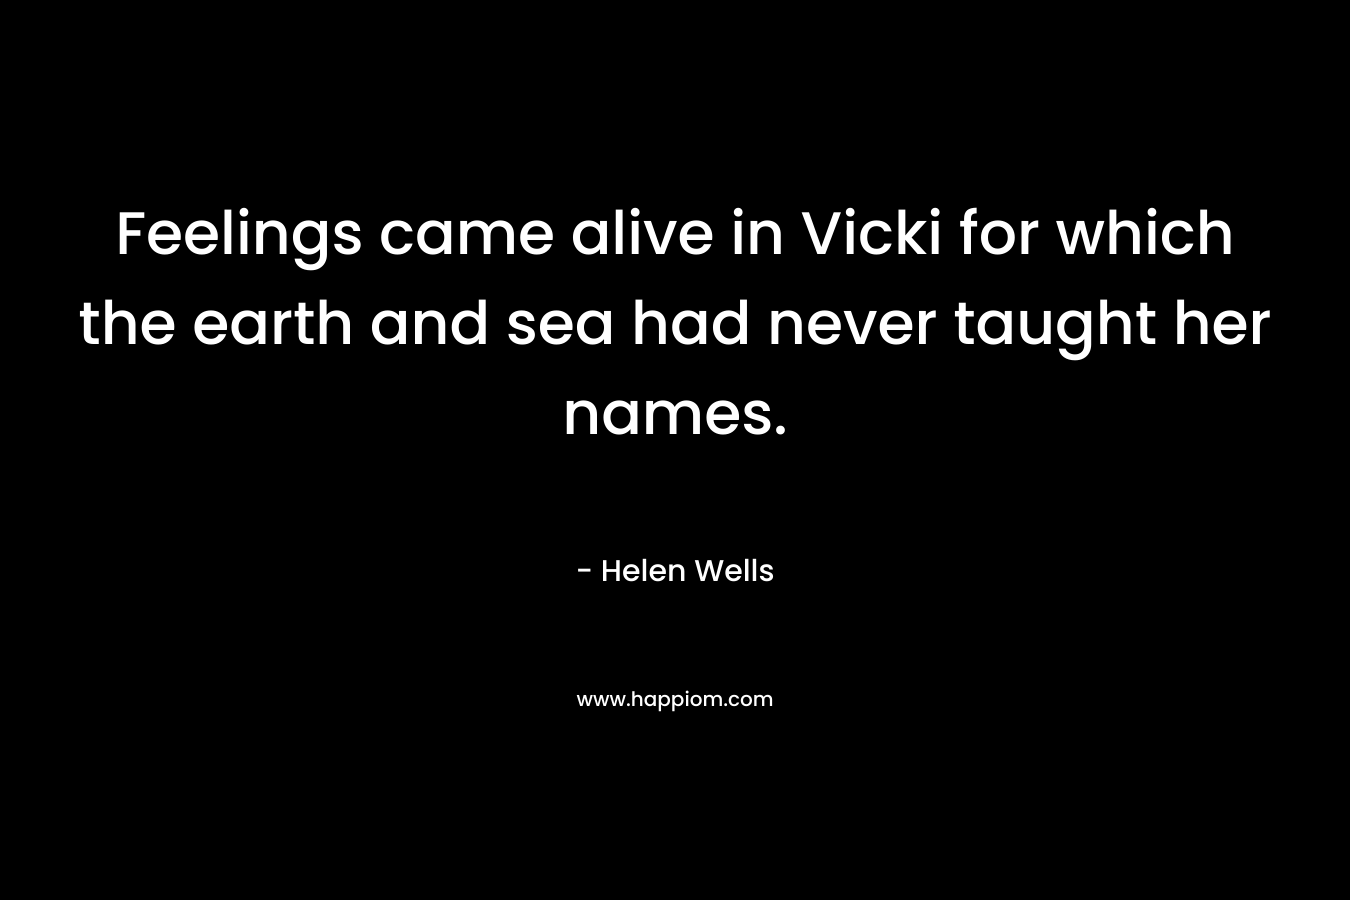 Feelings came alive in Vicki for which the earth and sea had never taught her names.